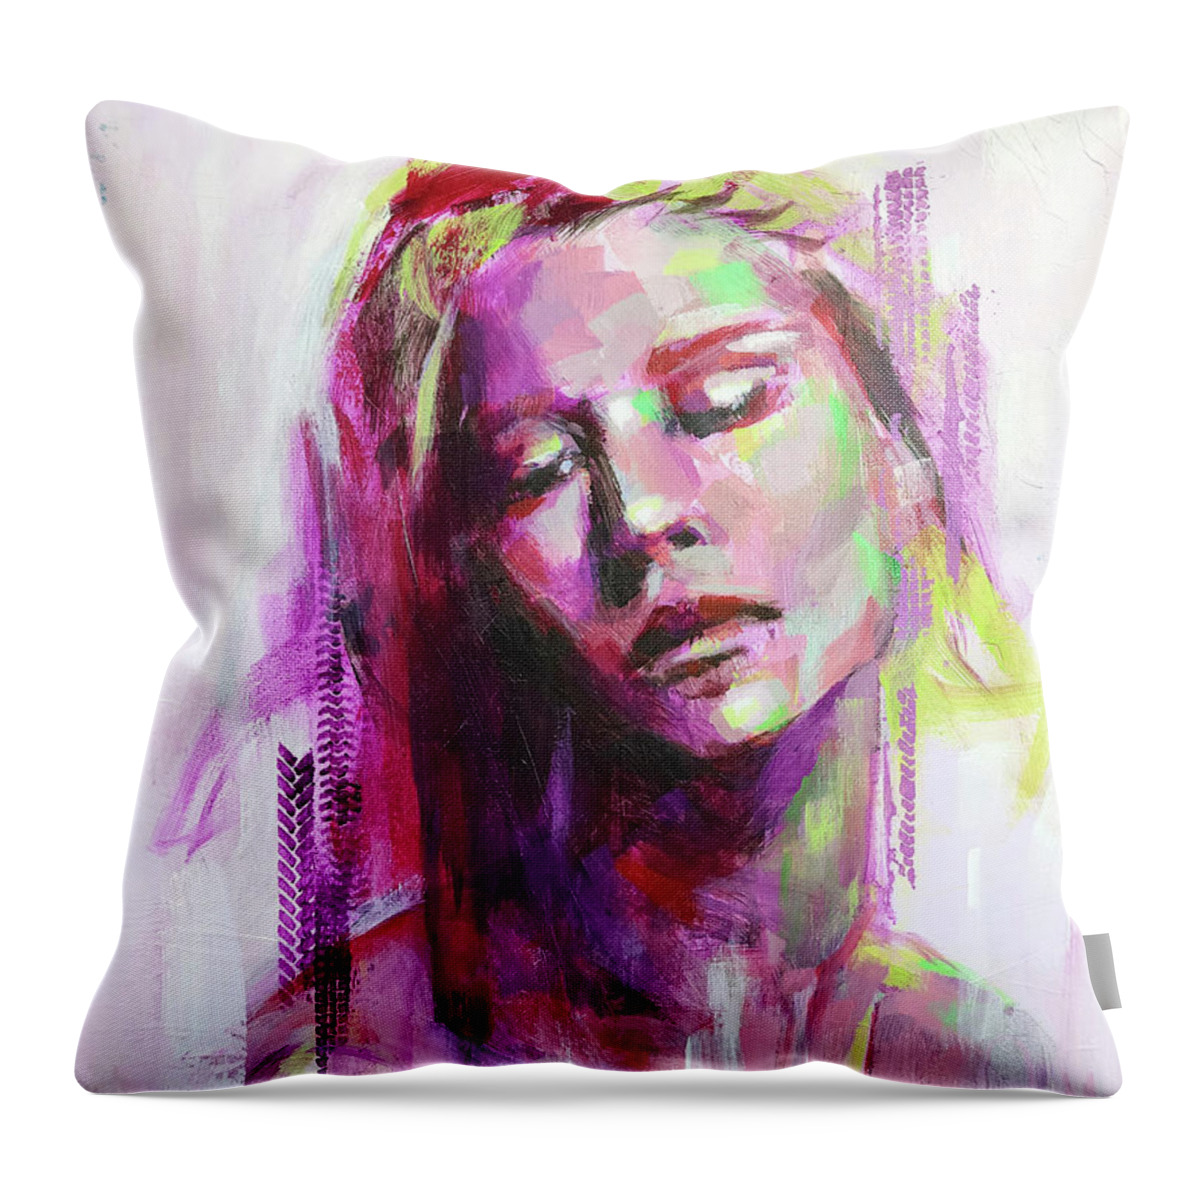 Acrylics Throw Pillow featuring the painting Magenta by Luzdy Rivera